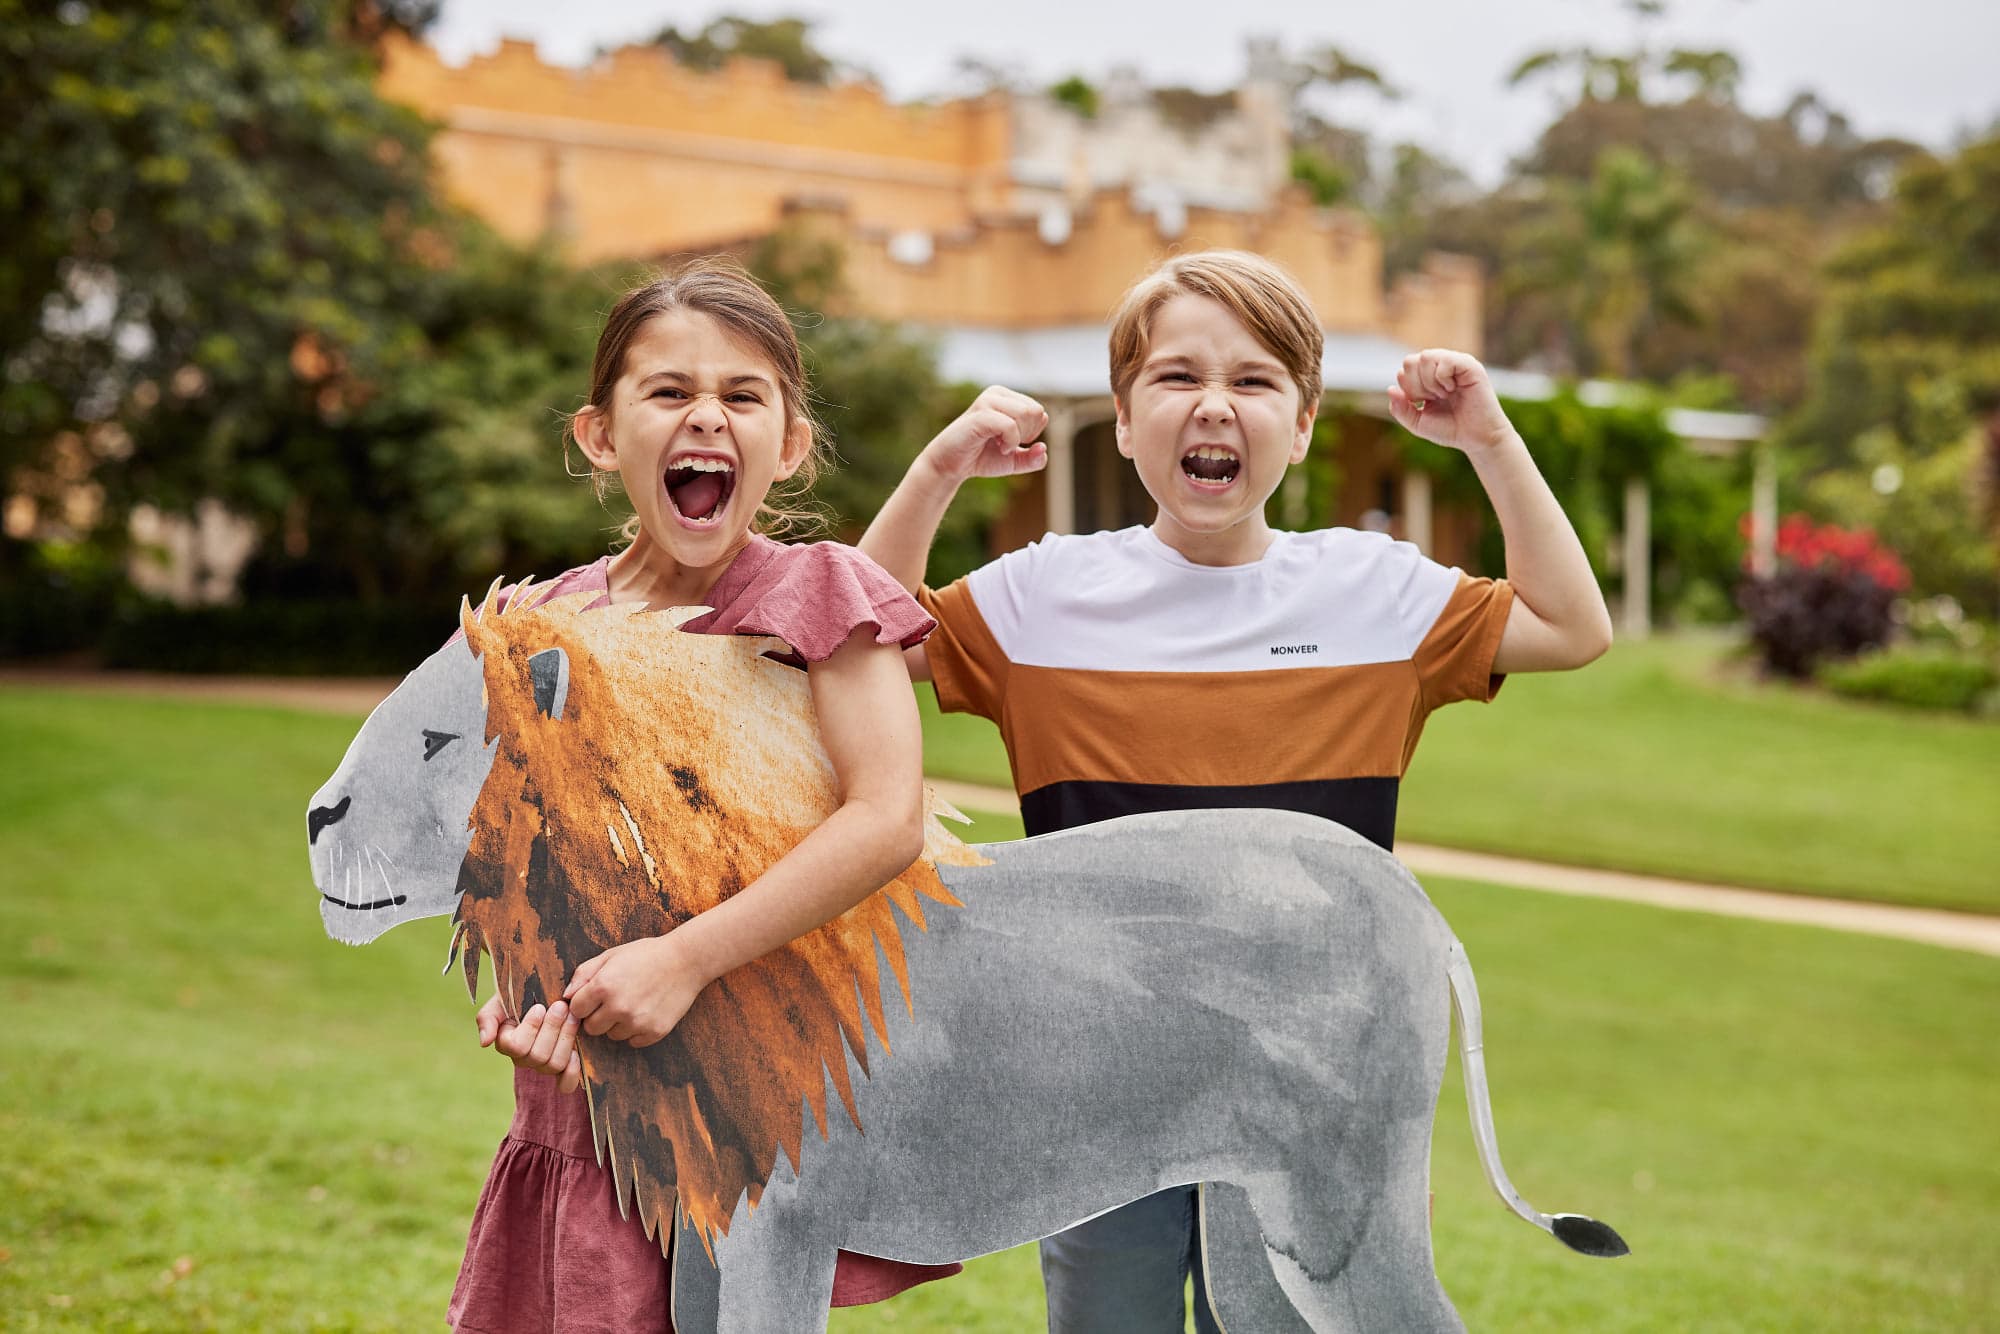 Wildlife Retreat at Taronga is an eco-retreat for the family to connect with nature, wildlife, and with each other. | Credit: Taronga Zoo Facebook